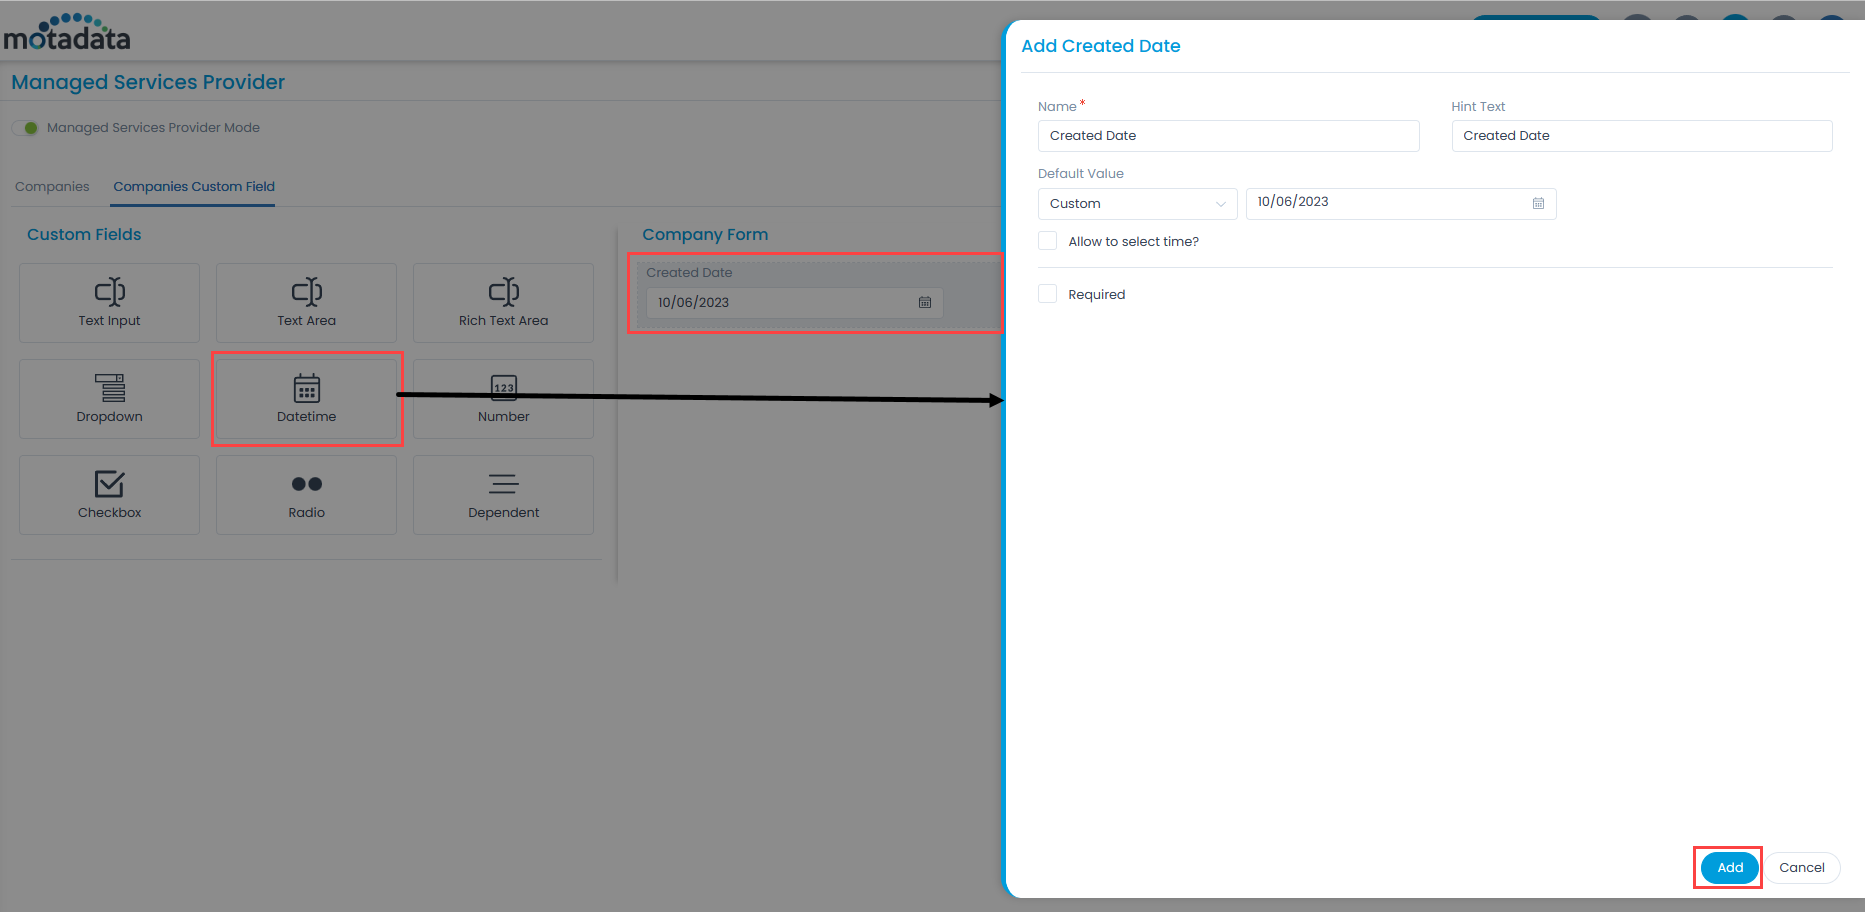 Adding a Custom Field in the Company Form